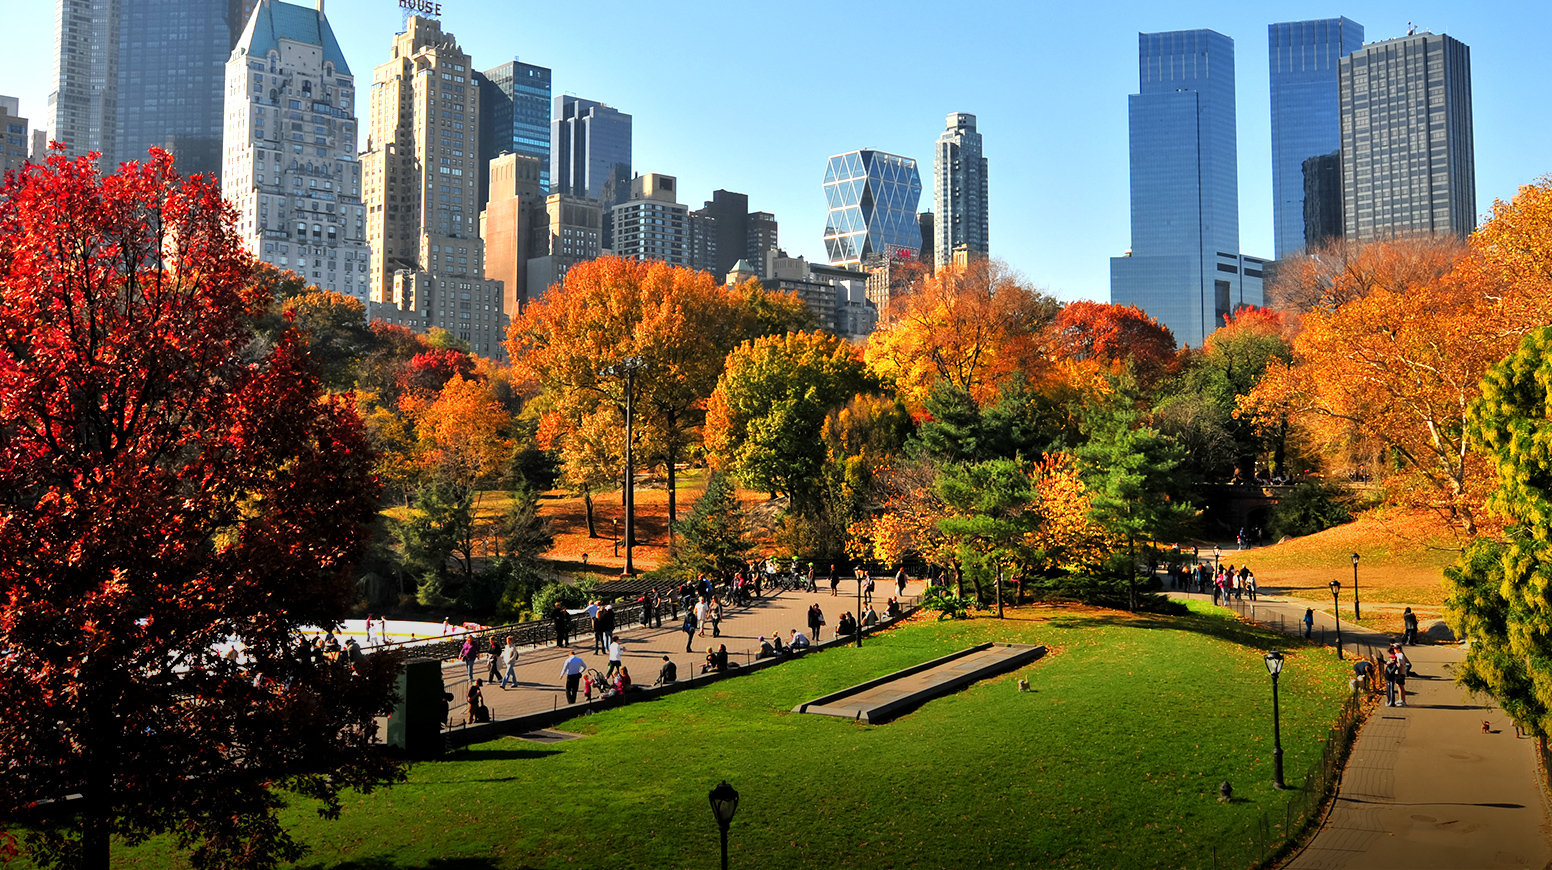 New York City’s Central Park in autumn with the city skyline in the background